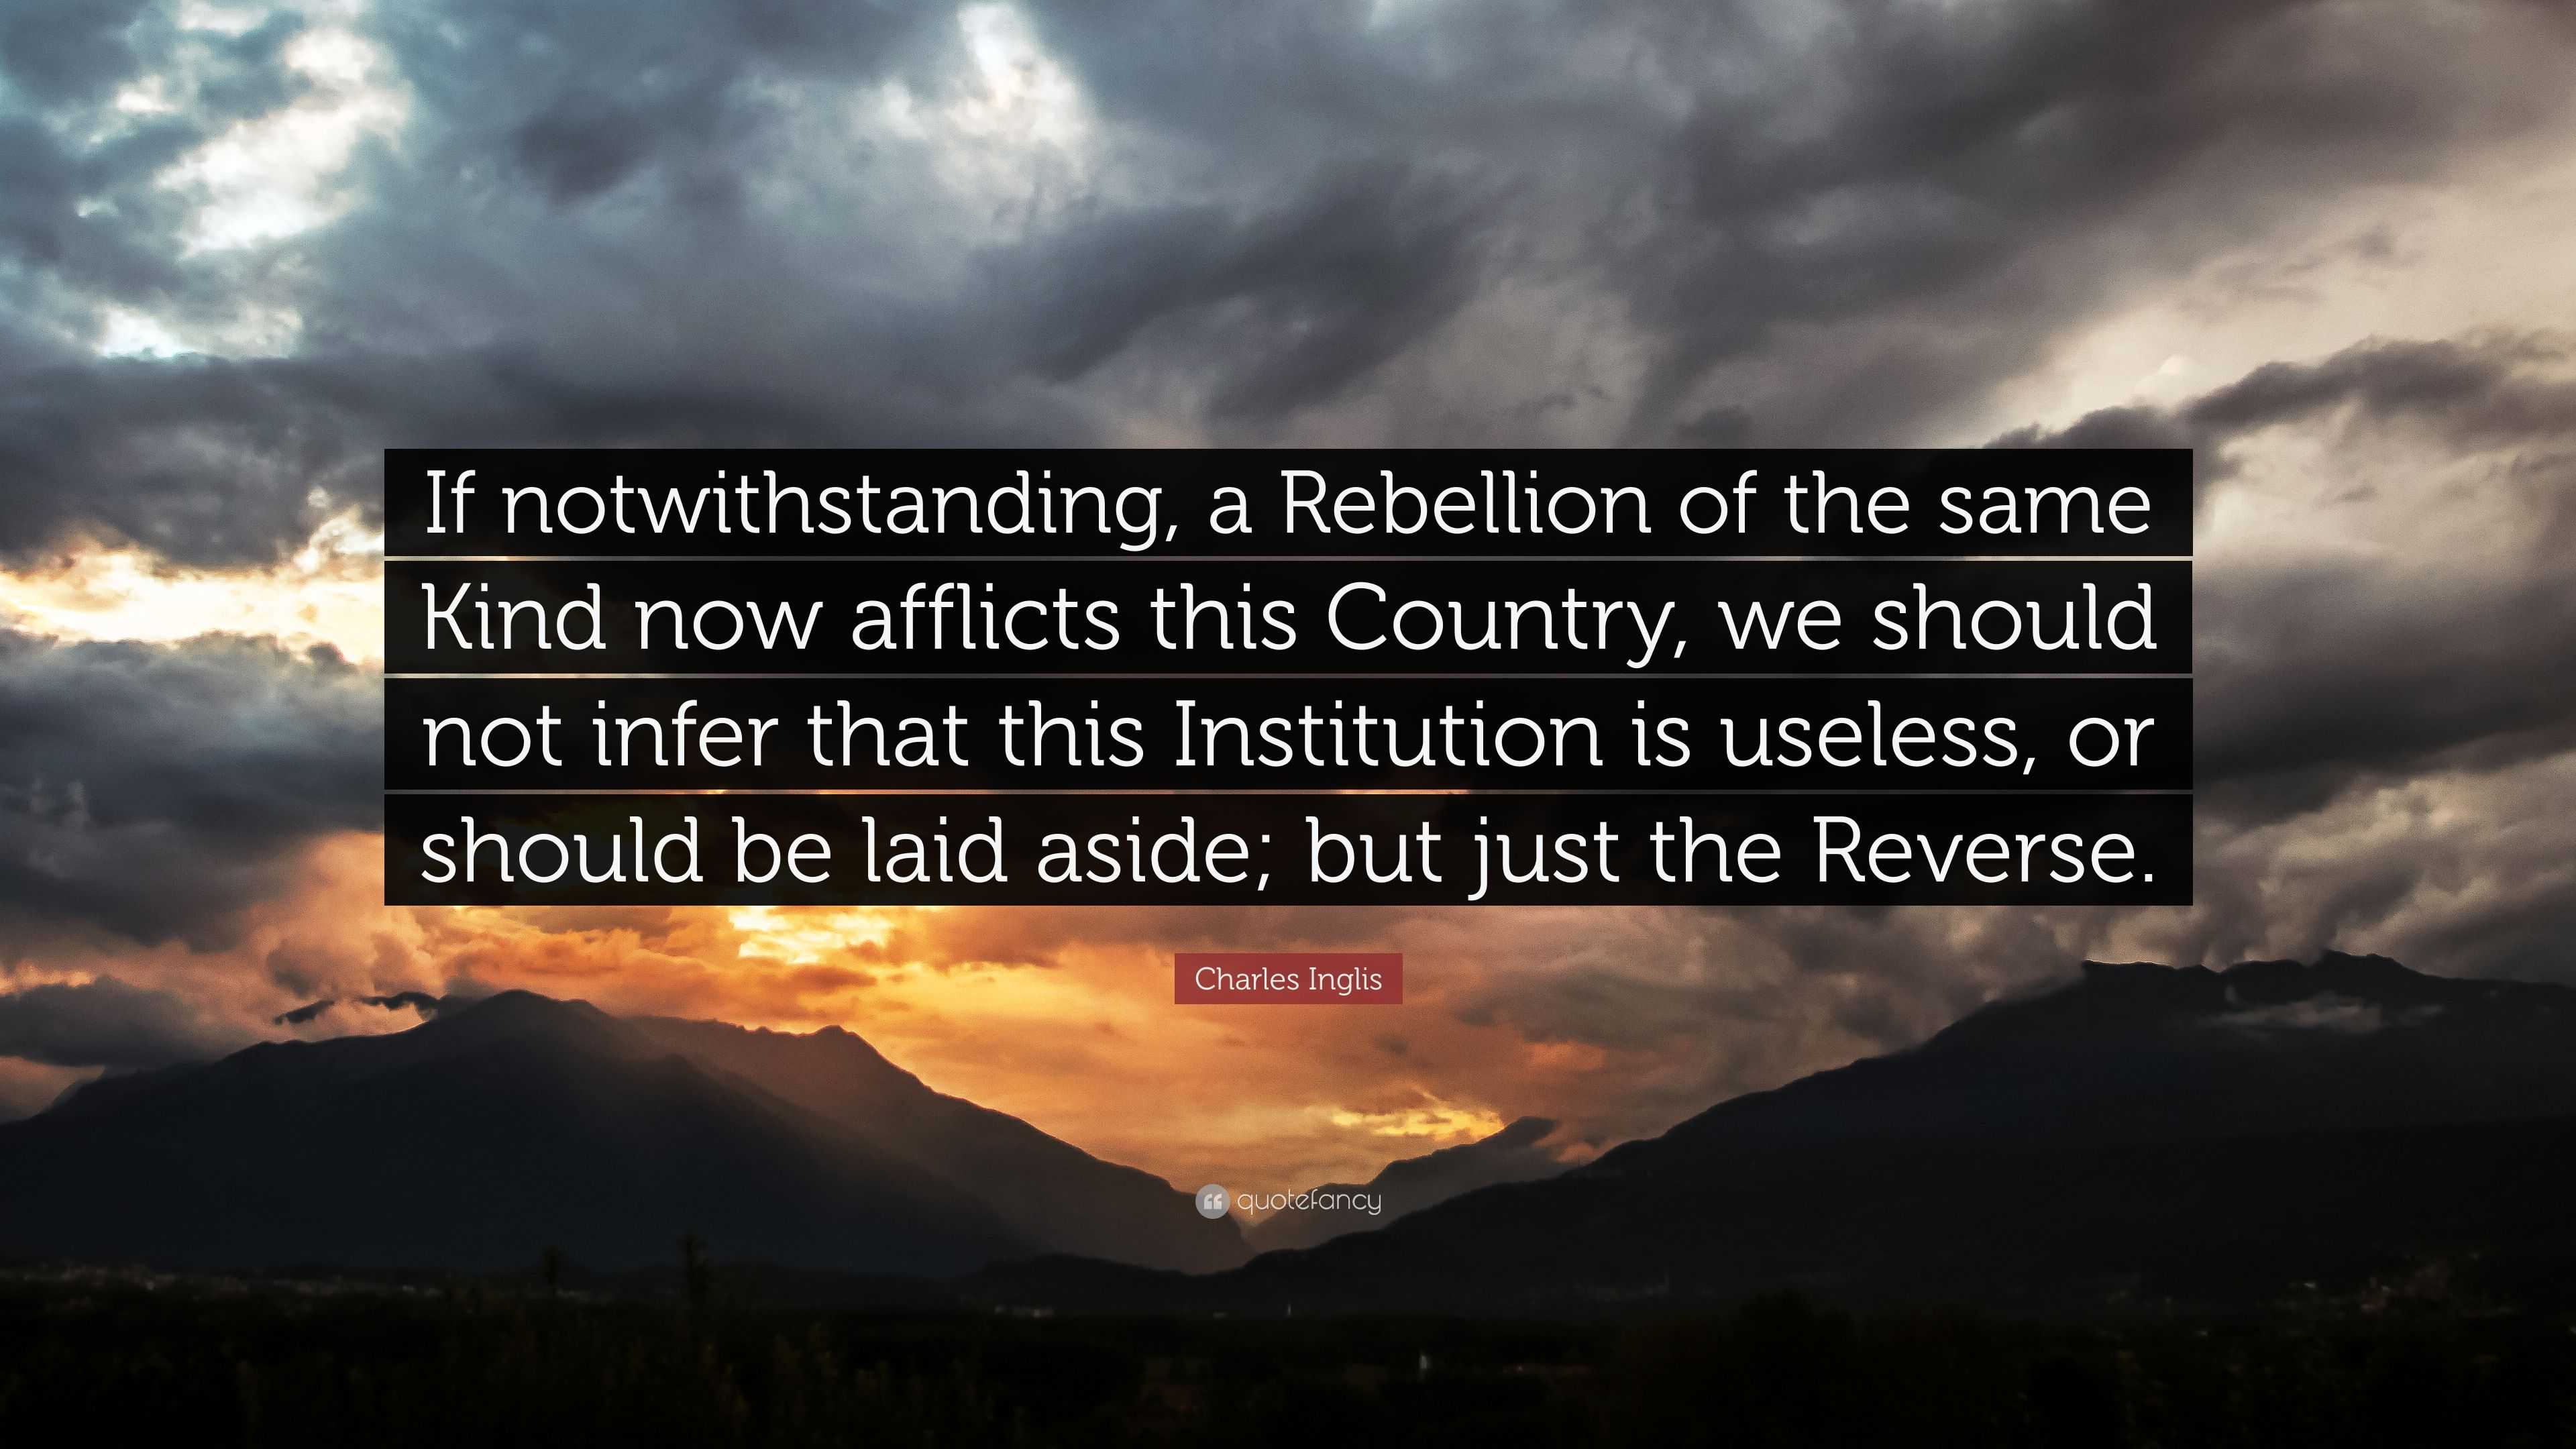 Charles Inglis Quote: “If notwithstanding, a Rebellion of the same Kind ...